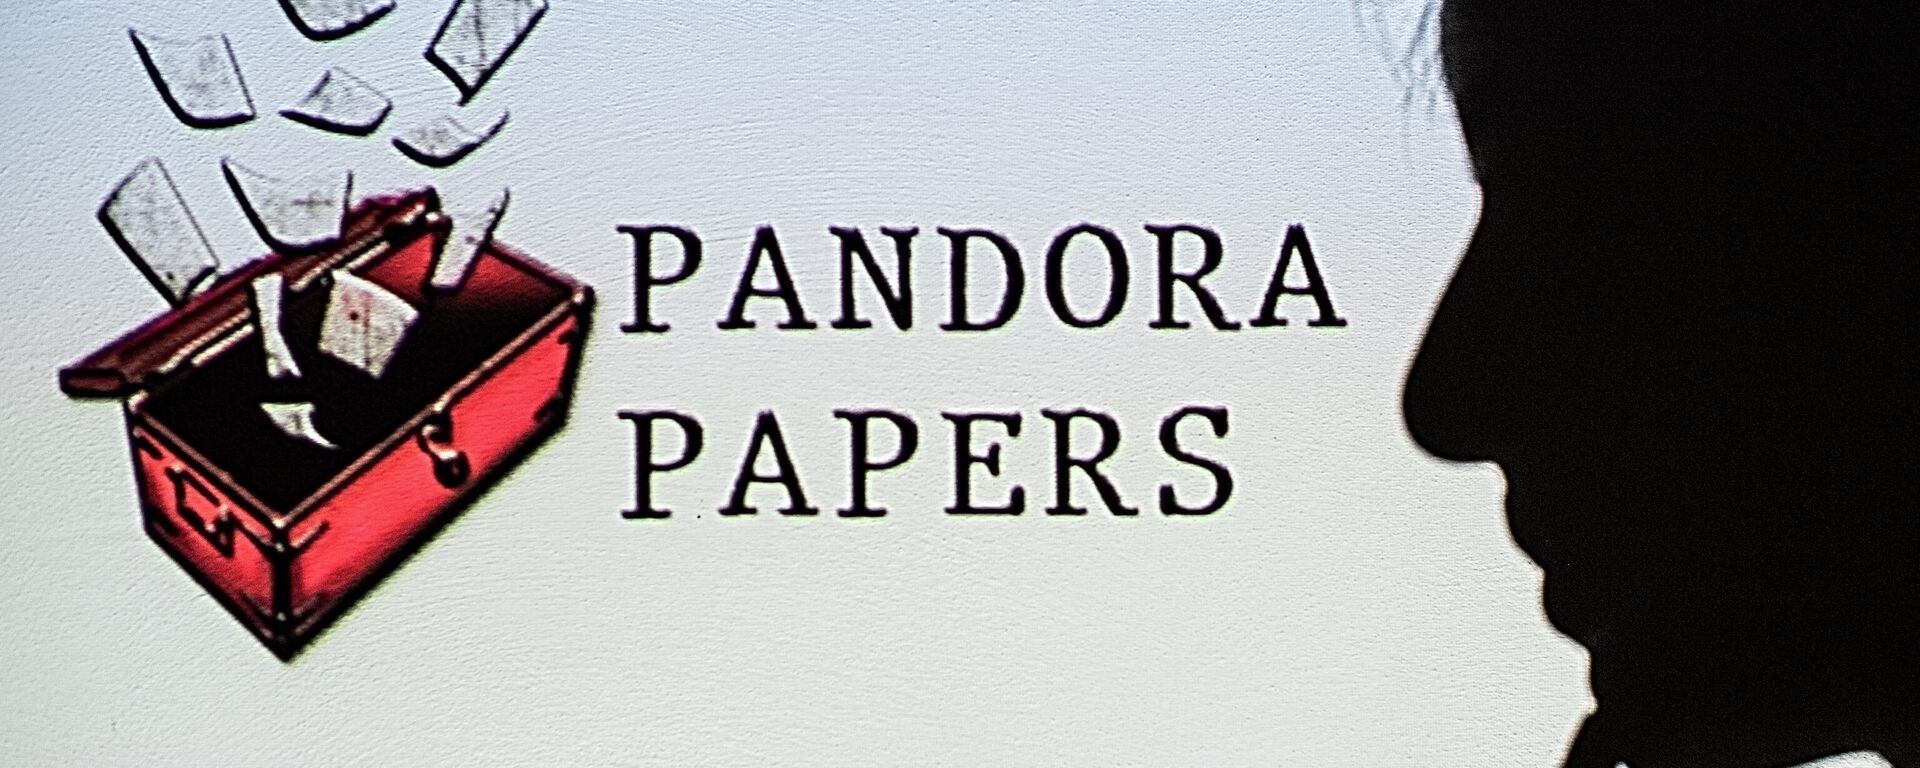 This photograph illustration shows a woman's shadow cast on the logo of Pandora Papers, in Lavau-sur-Loire, western France, on October 4, 2021 - Sputnik International, 1920, 05.10.2021